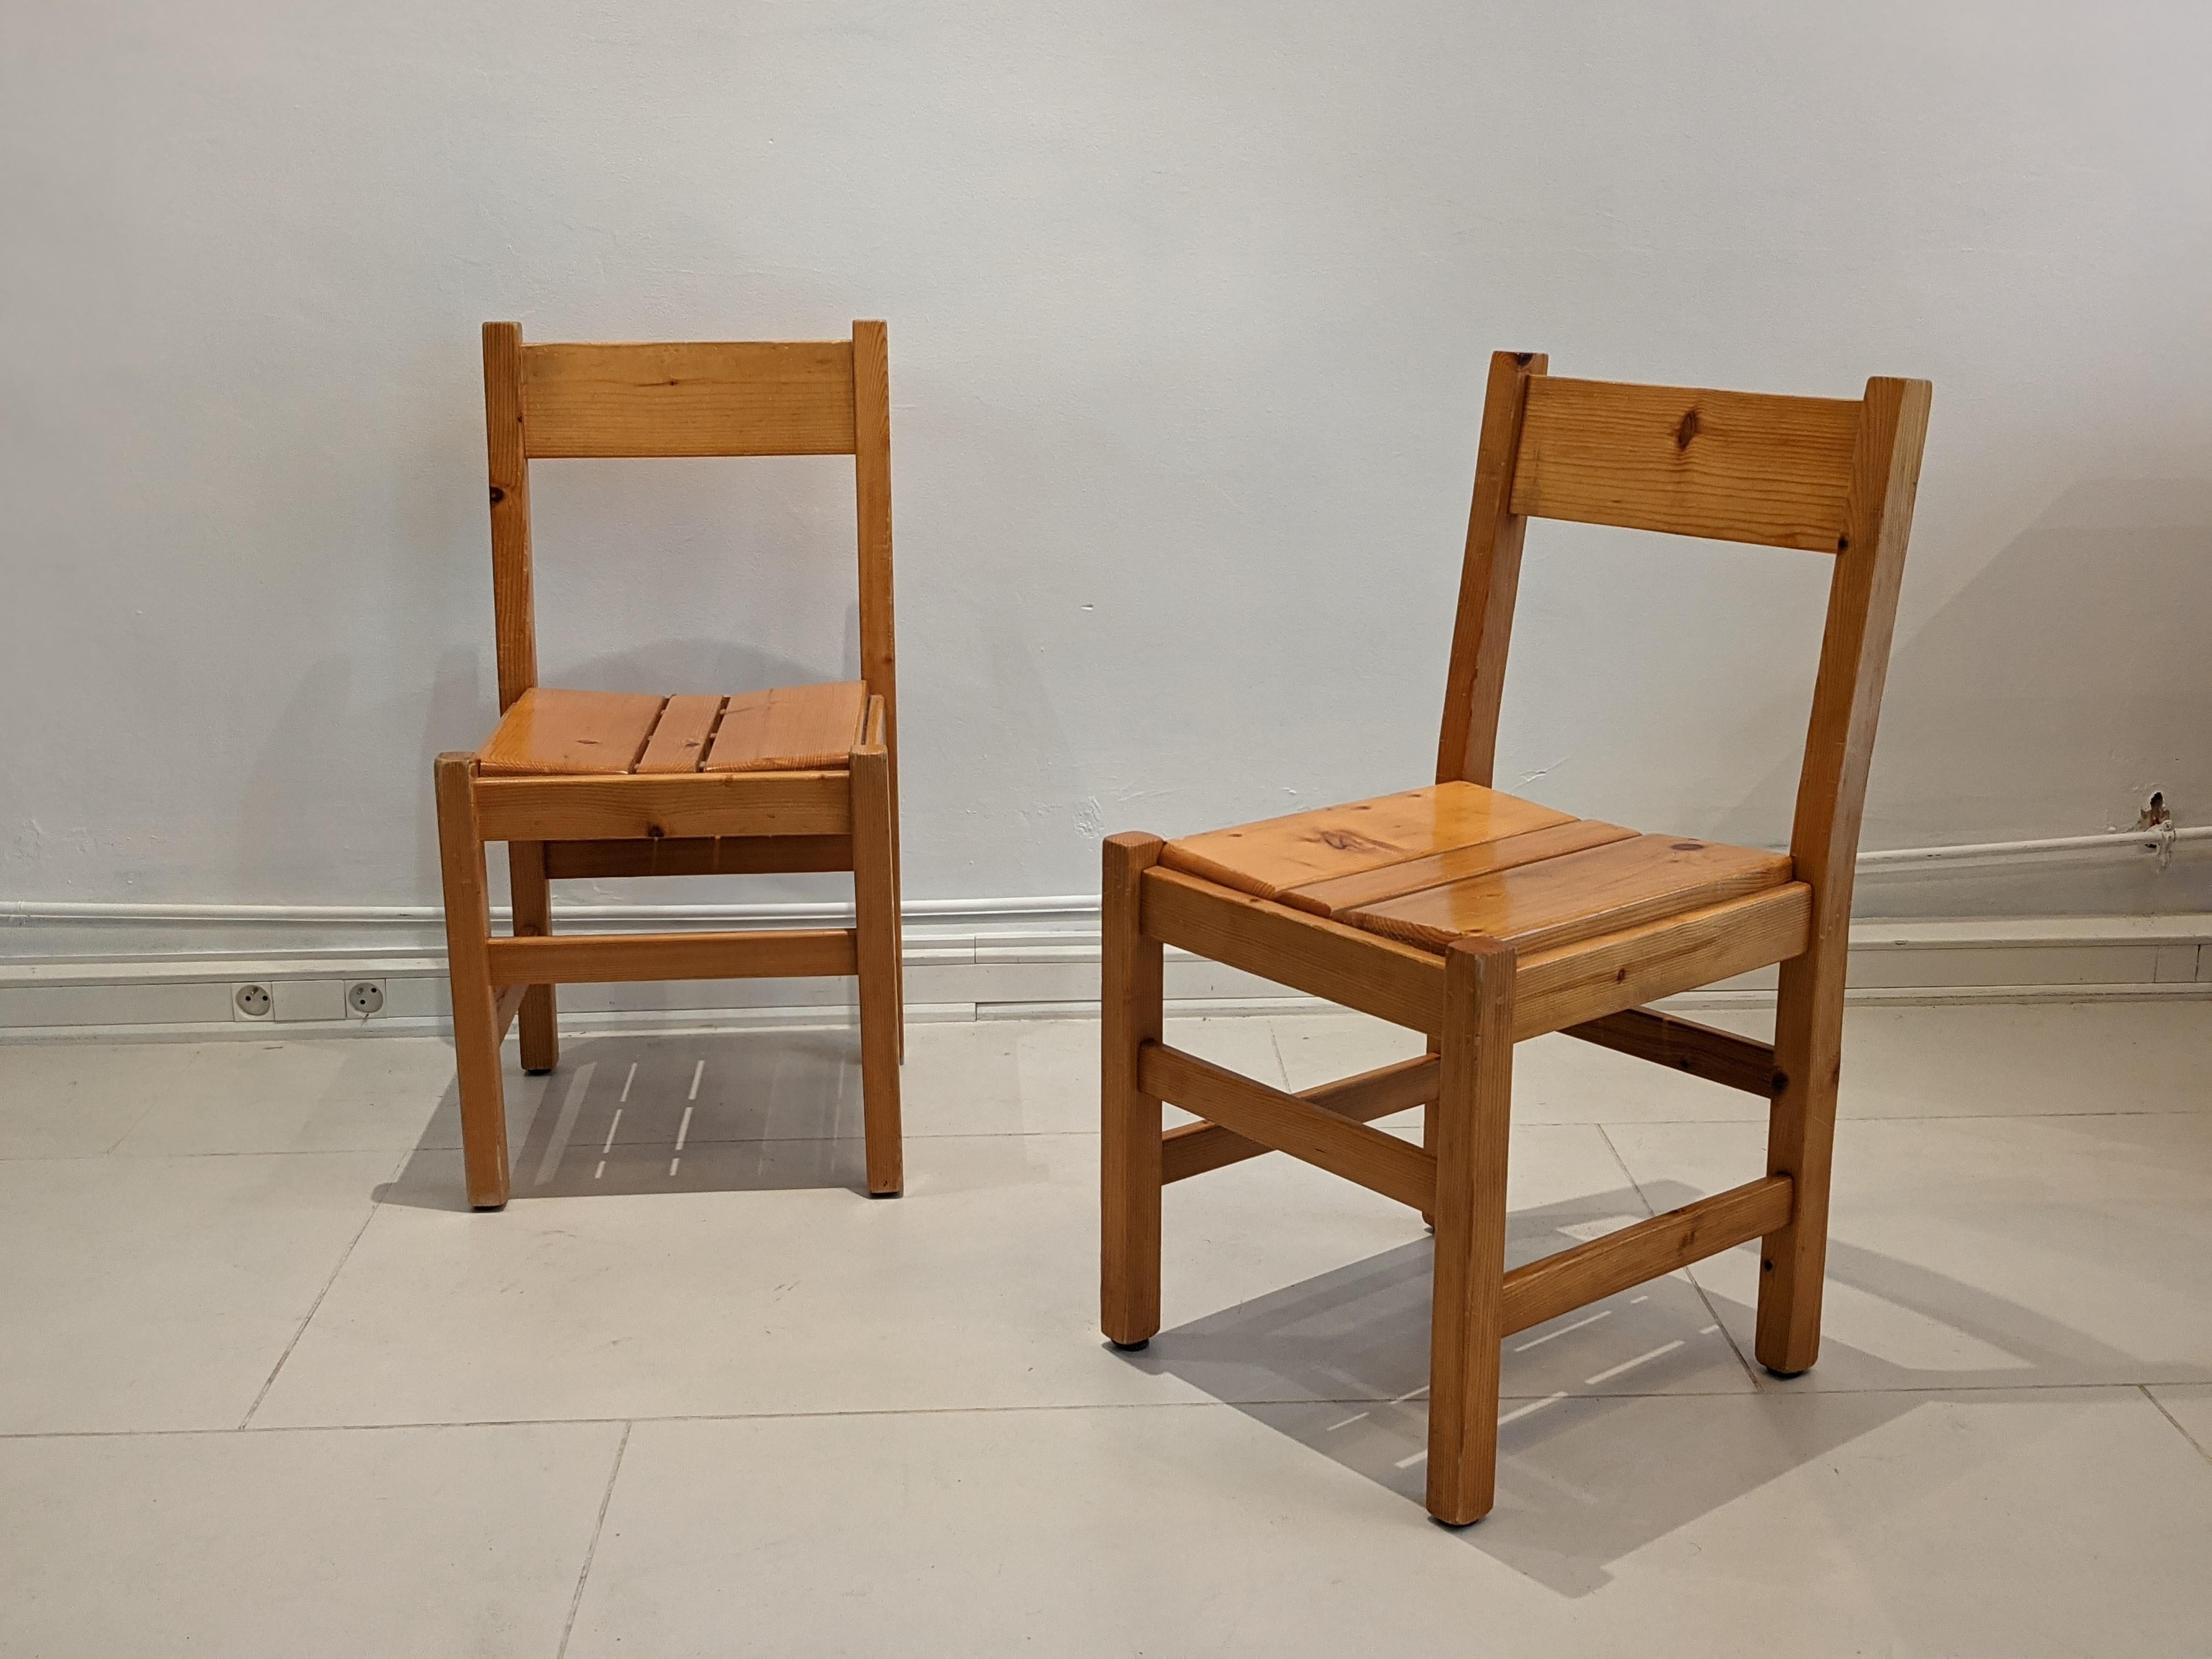 Set of 2 chairs made of pine wood by Charlotte Perriand for Les Arcs. Very good condition.